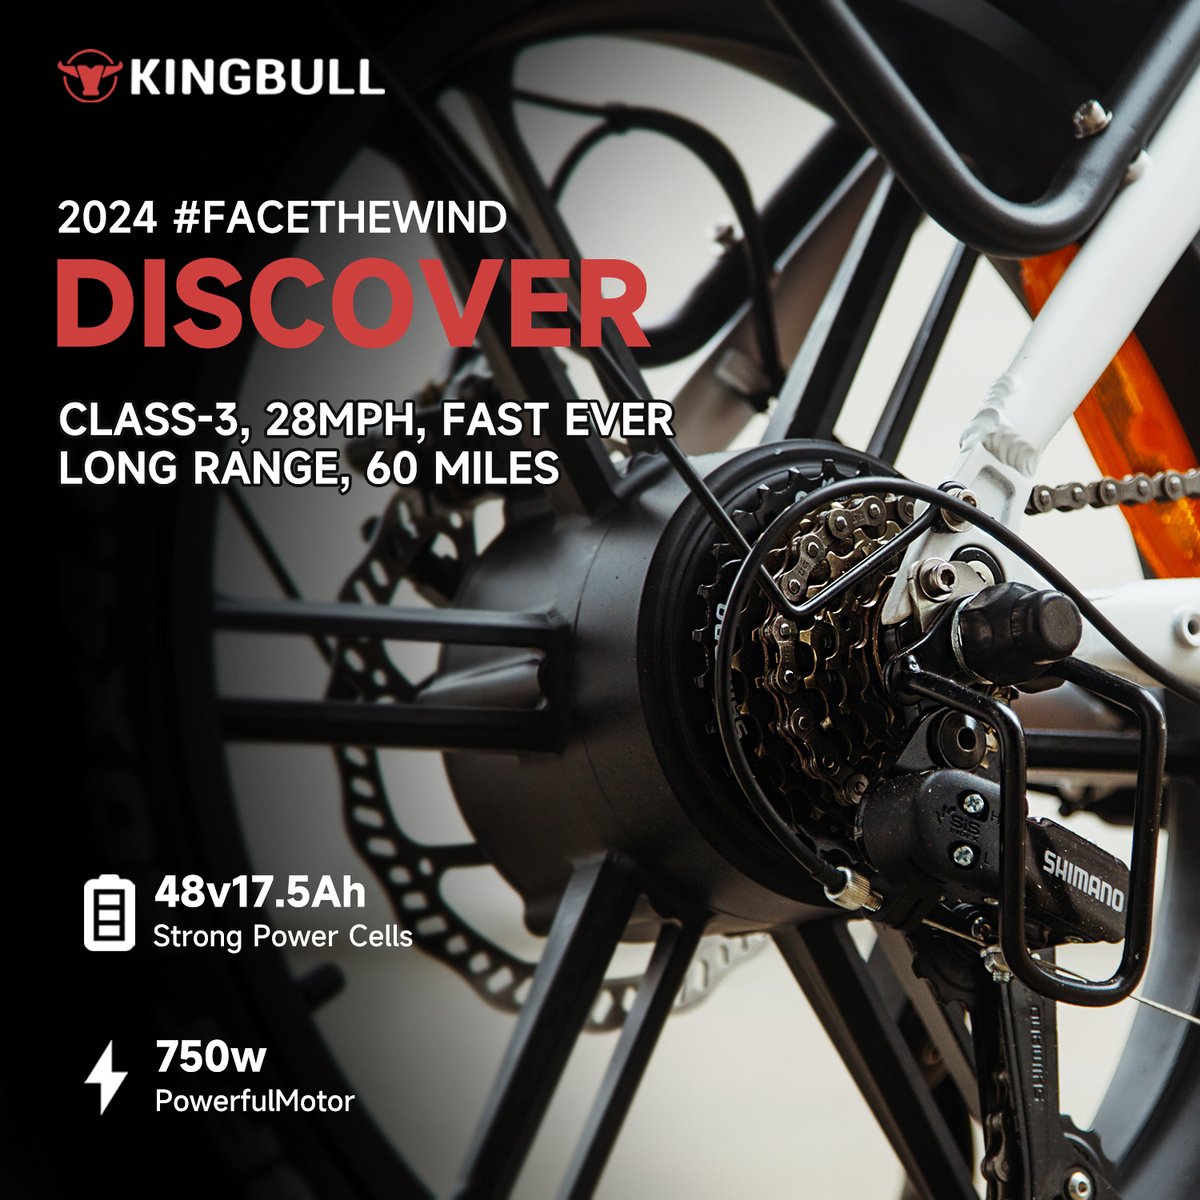 1 DAY LEFT TO LAUNCH WITH SPECIAL
OFFER🎁

Stay tune to #Discover more detailed features of
Kingbull Discover
⭕Unlockable Class-3 Ebike
⭕Speed: Upto 28Mph
⭕Range: 60 Miles in Pas Mode
🔋Battery: 1220W Peak(750W Standard) with 84NM
......
#FaceTheWind #KingbullBike #NewLaunch